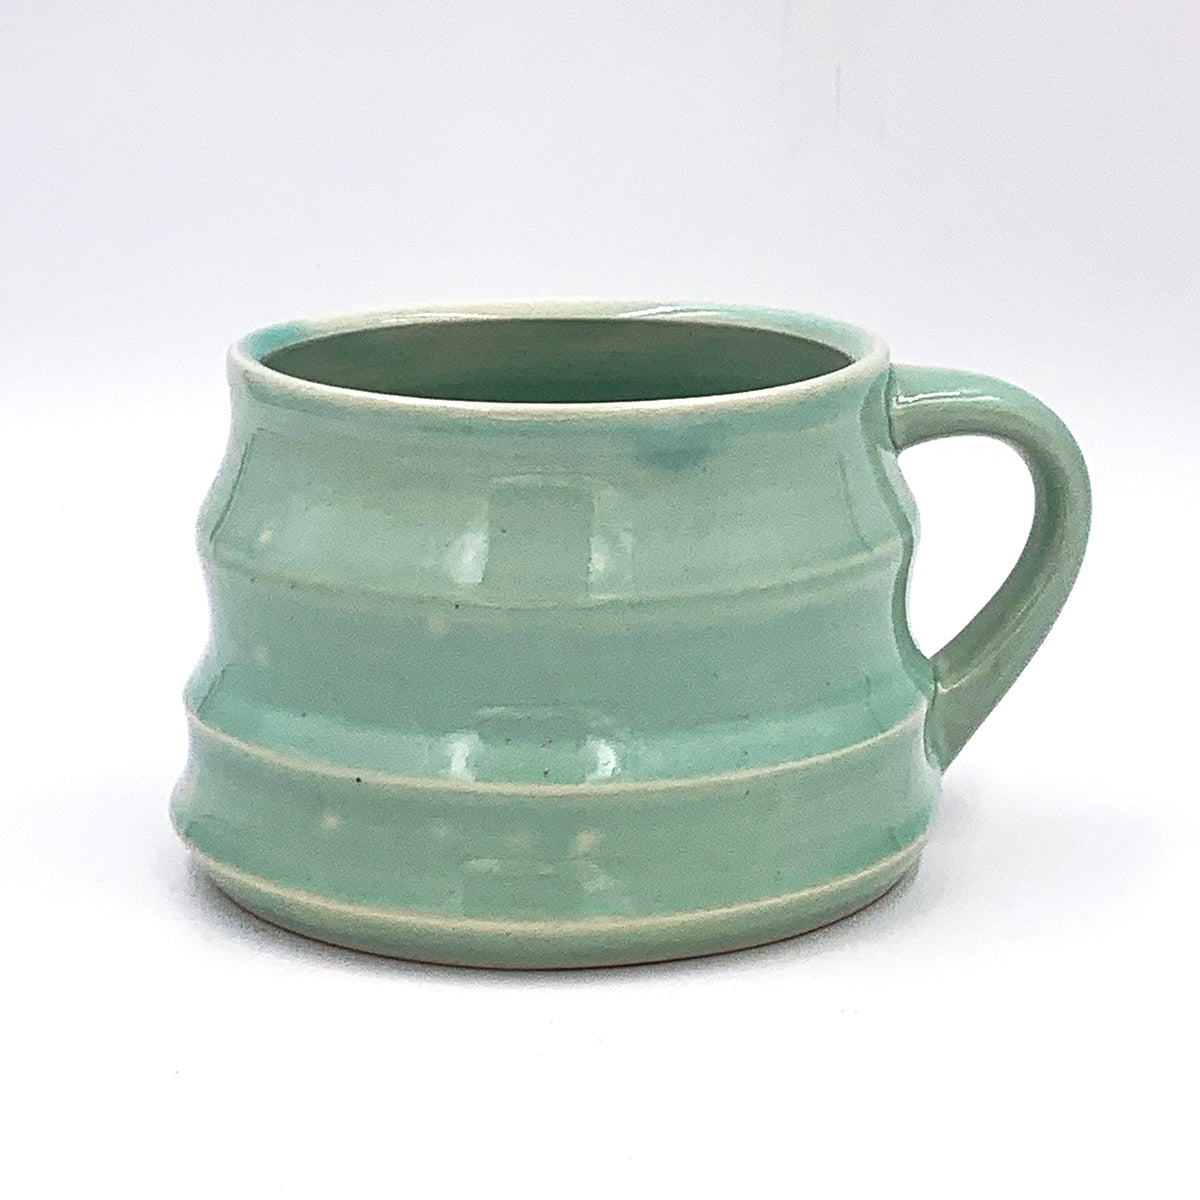 One of a kind, 16 oz Celadon Squish